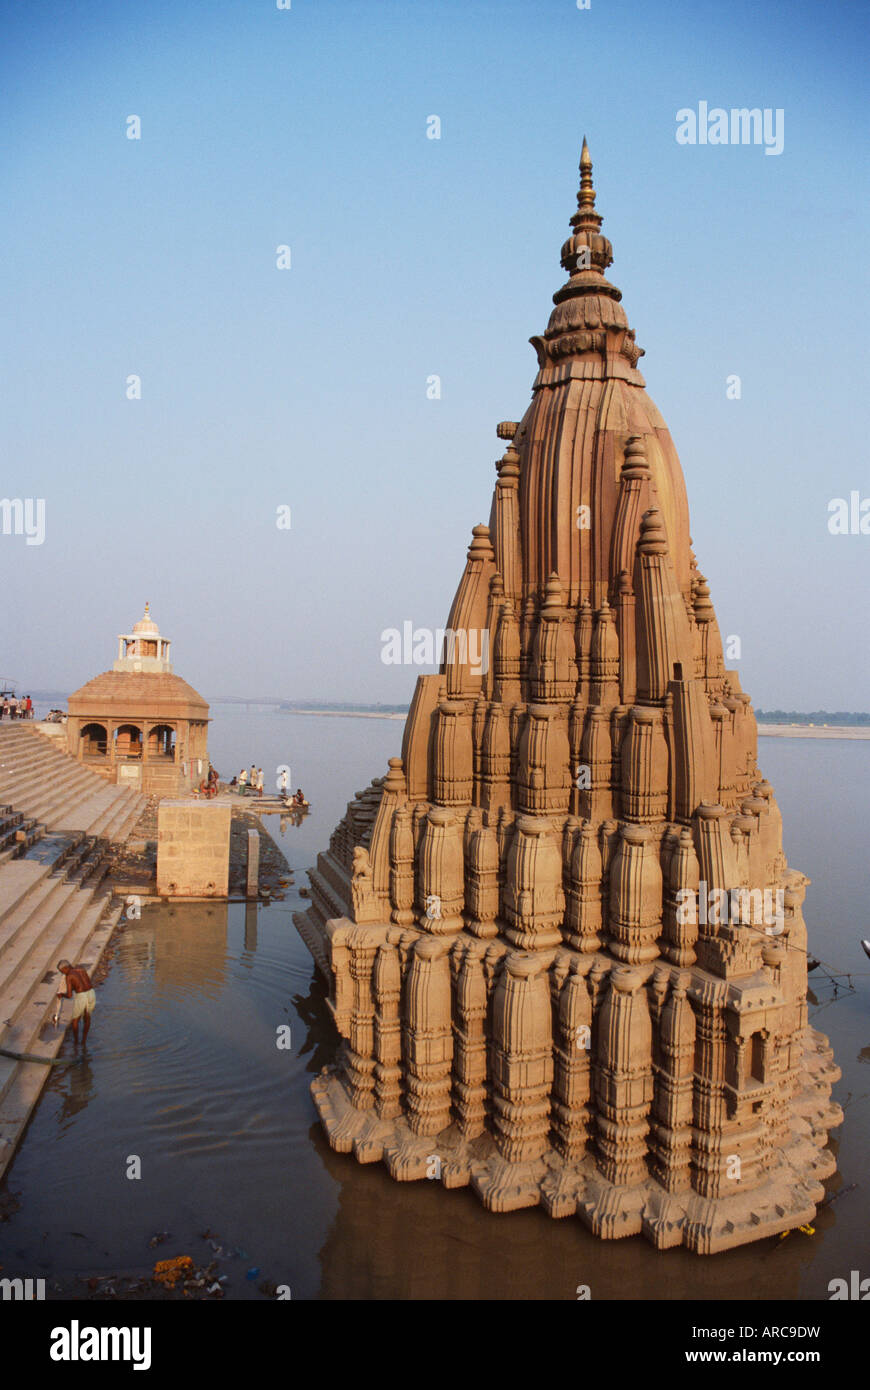 Partially submerged tilted Shiva temple below the ghats on the edge of the River Ganges, Varanasi, Uttar Pradesh, India Stock Photo